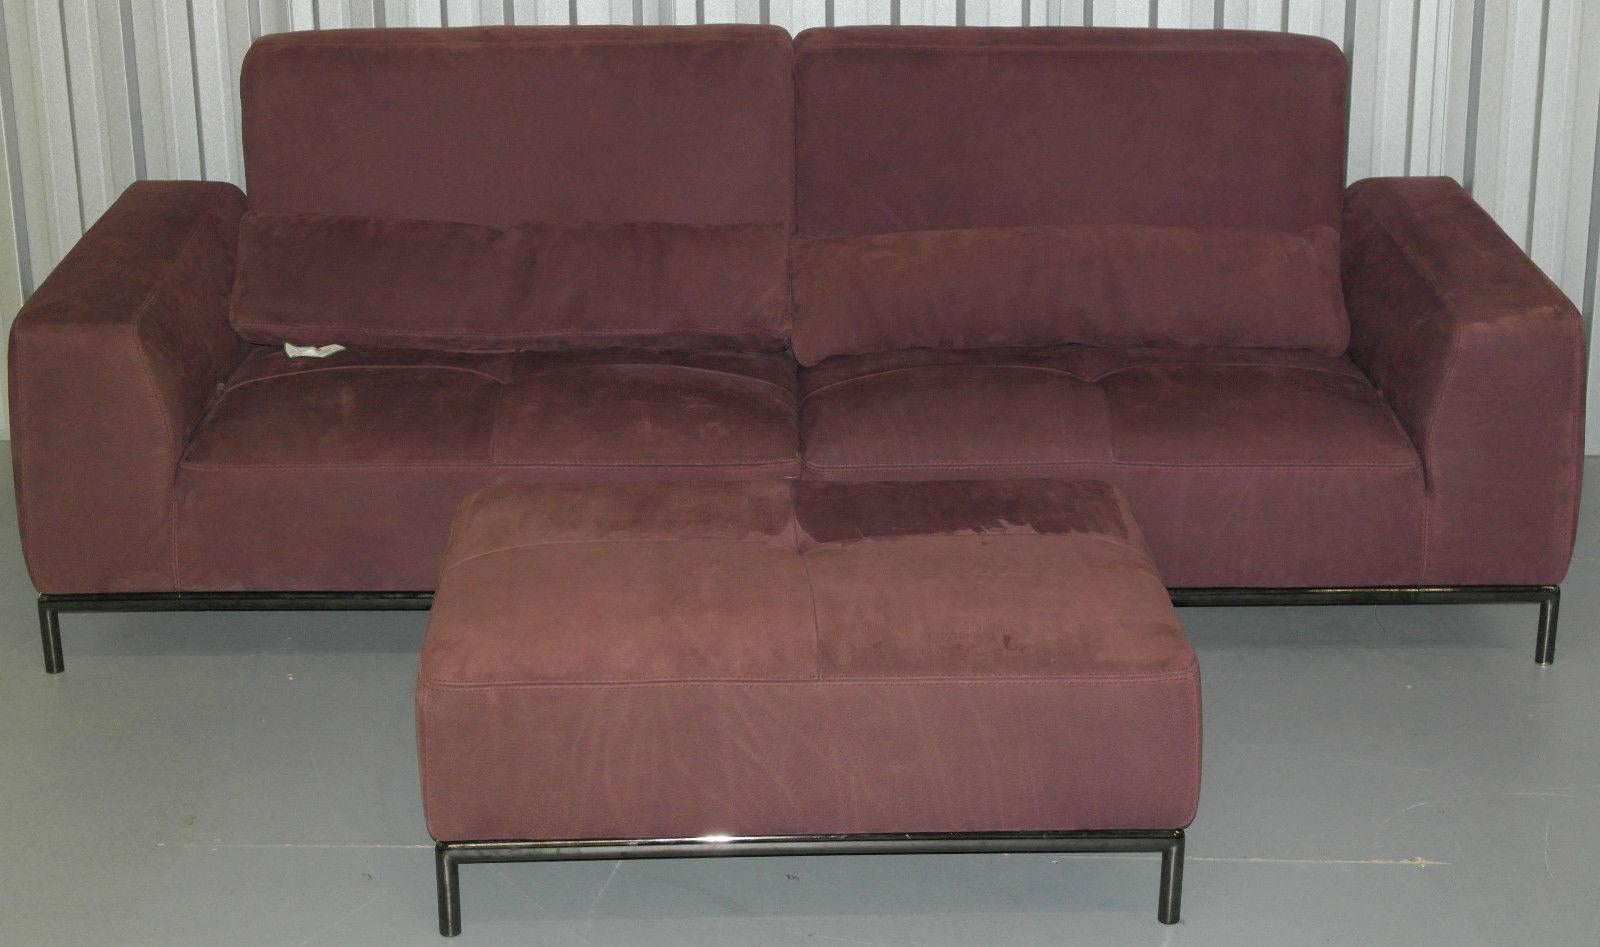 WIMBLEDON-FURNITURE

We are delighted to offer for sale this stunning nubuck velvet finish leather four seater recliner sofa and matching footstool 

I’ve never seen another like this and of this quality, each recliner back rest is controlled by an